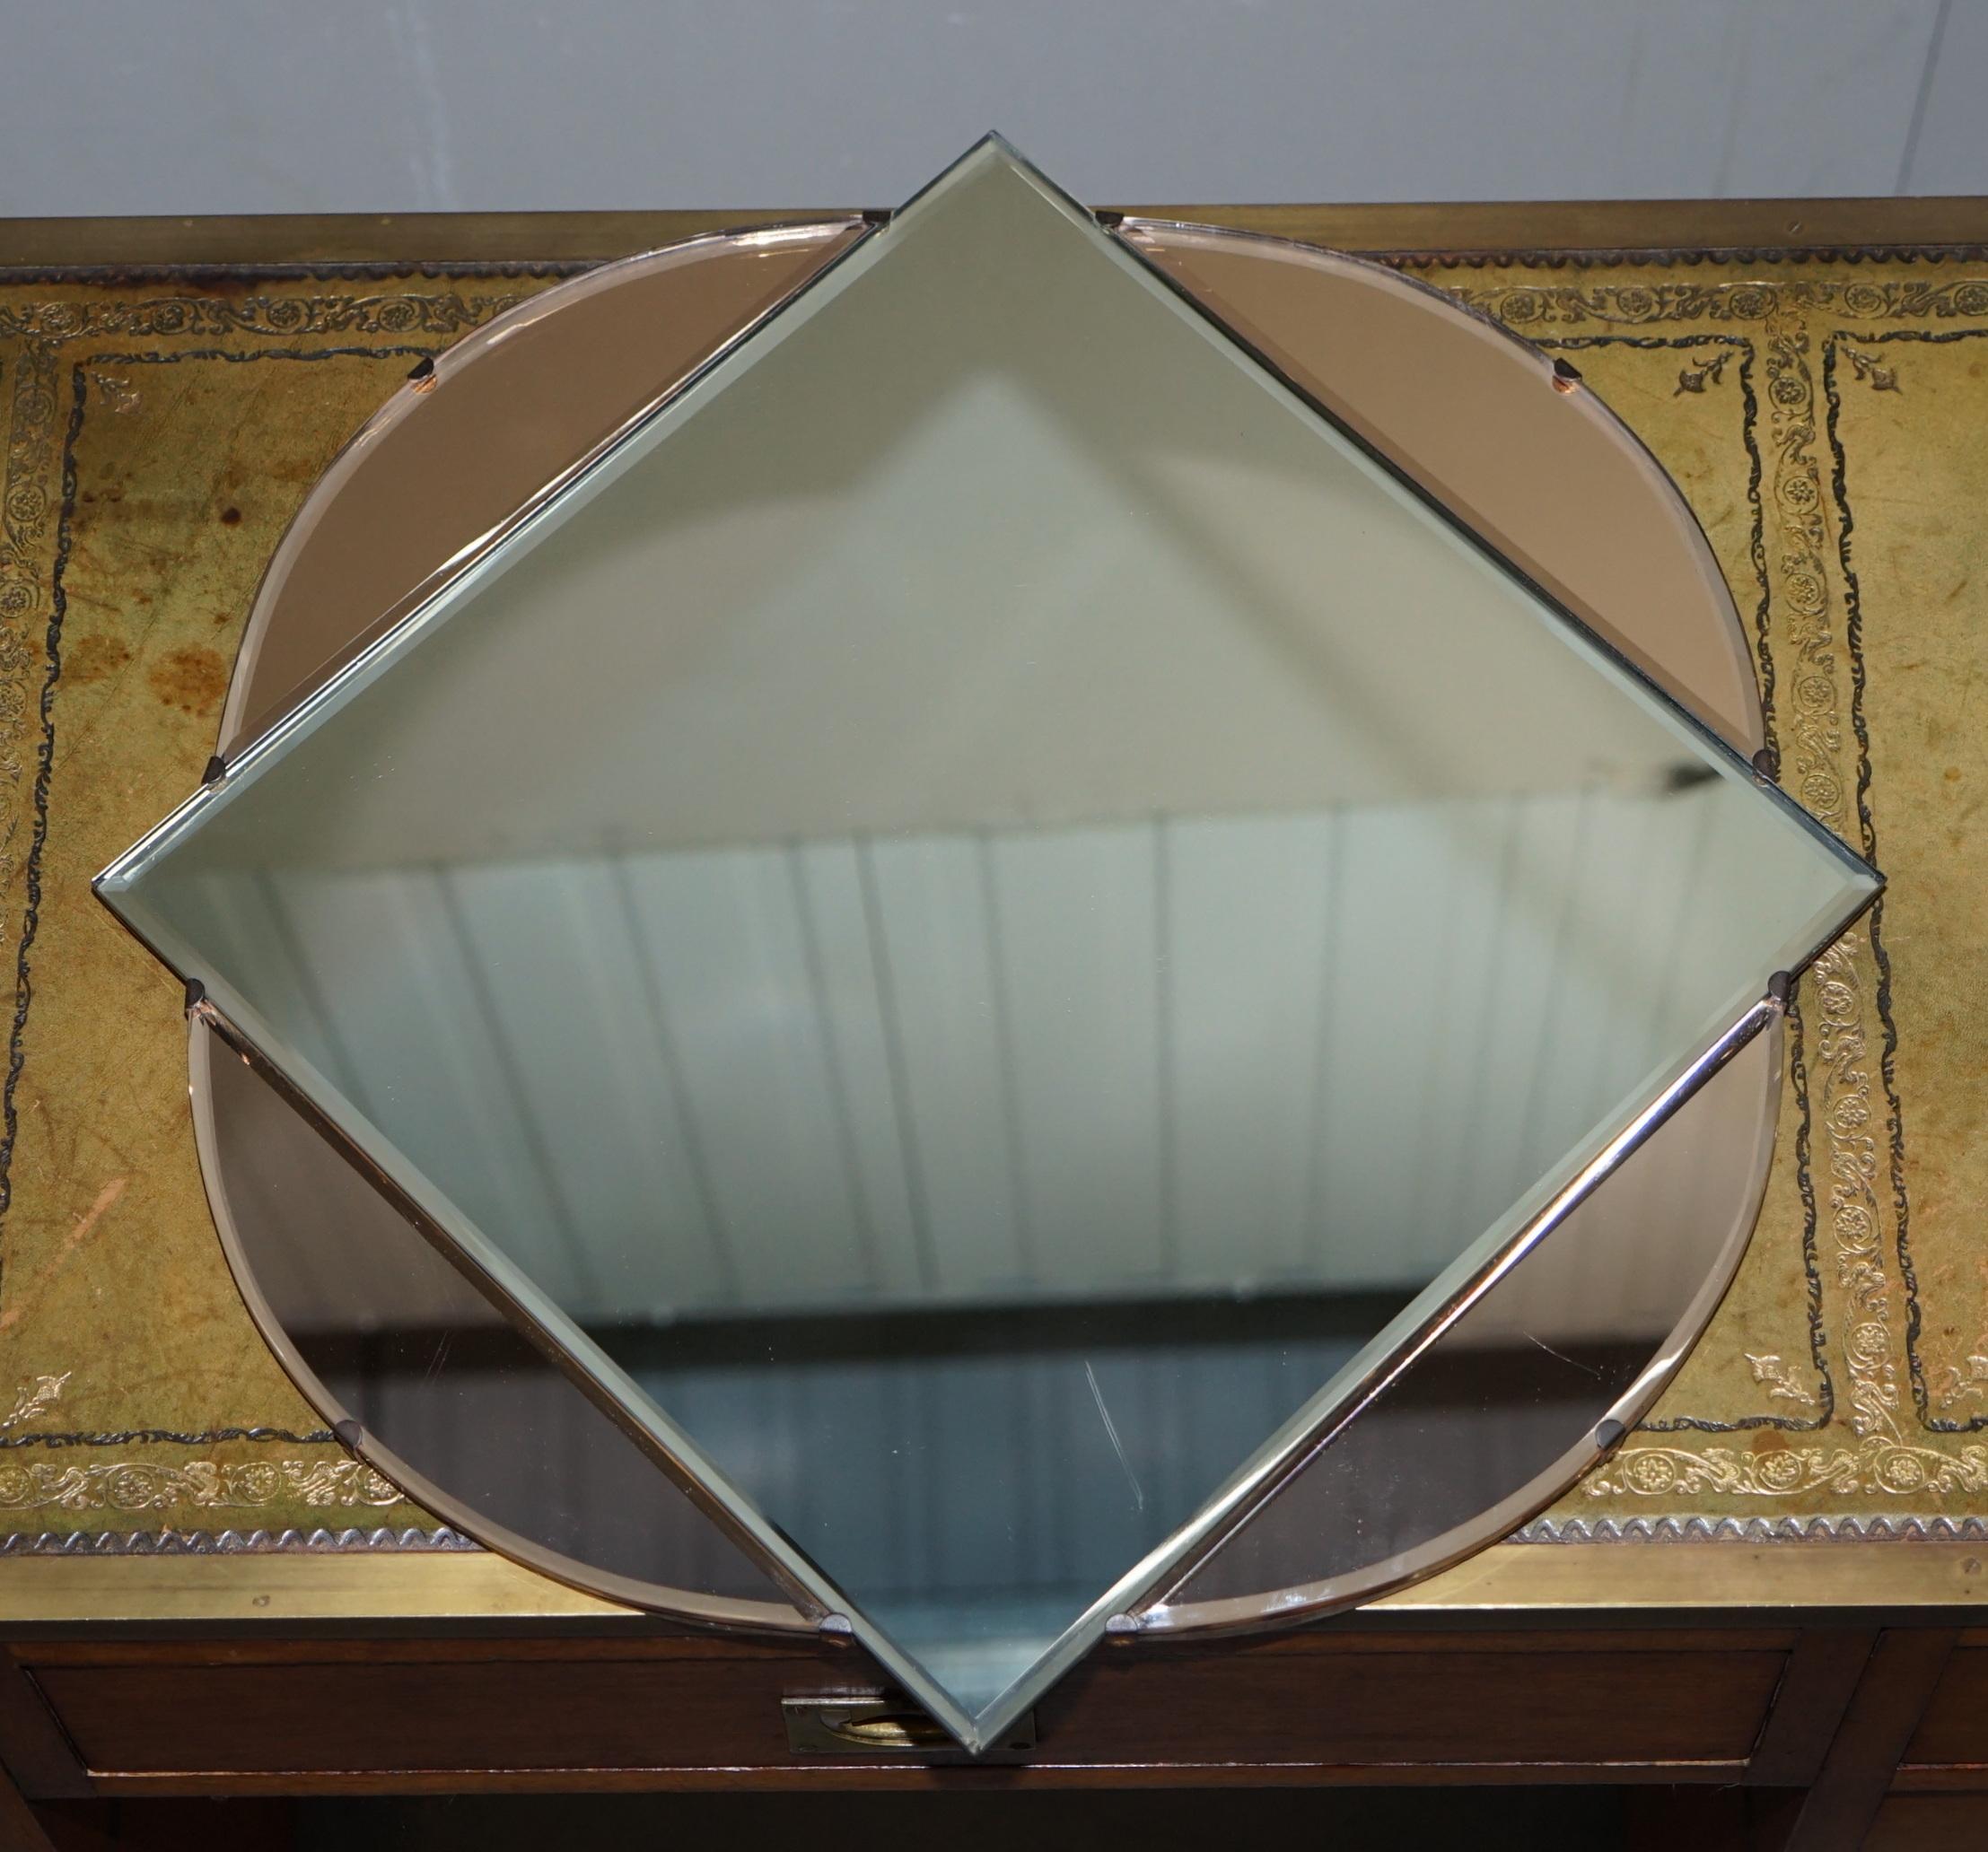 We are delighted to offer for sale this stunning and exceptionally rare circa 1930s Art Deco glass French Venetian mirror with beveled edge frame 

A very good looking well made and decorative wall mirror, these are highly collectable, they never